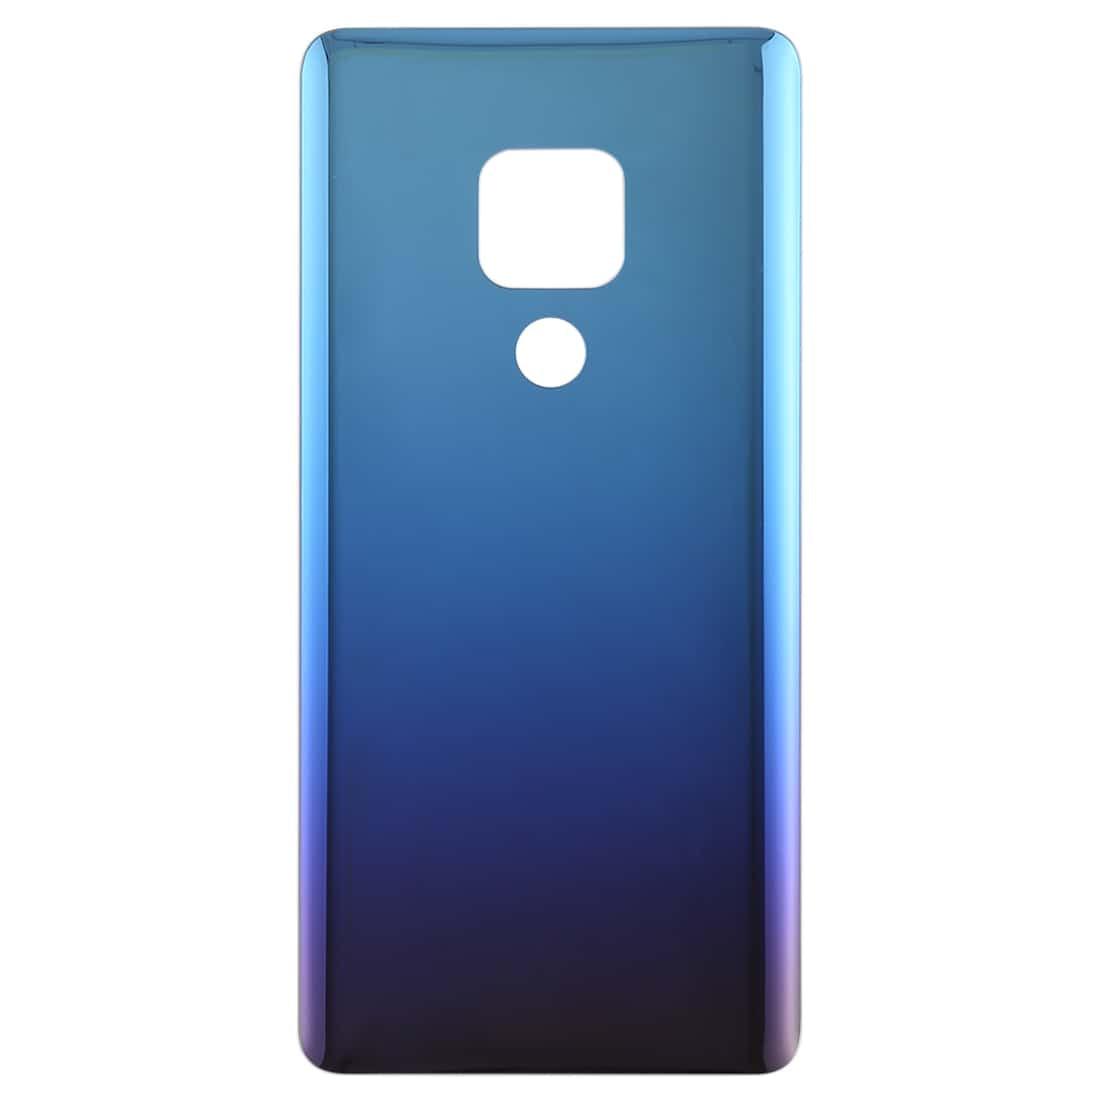 Back Glass Panel for  Huawei Mate 20 Twilight Blue